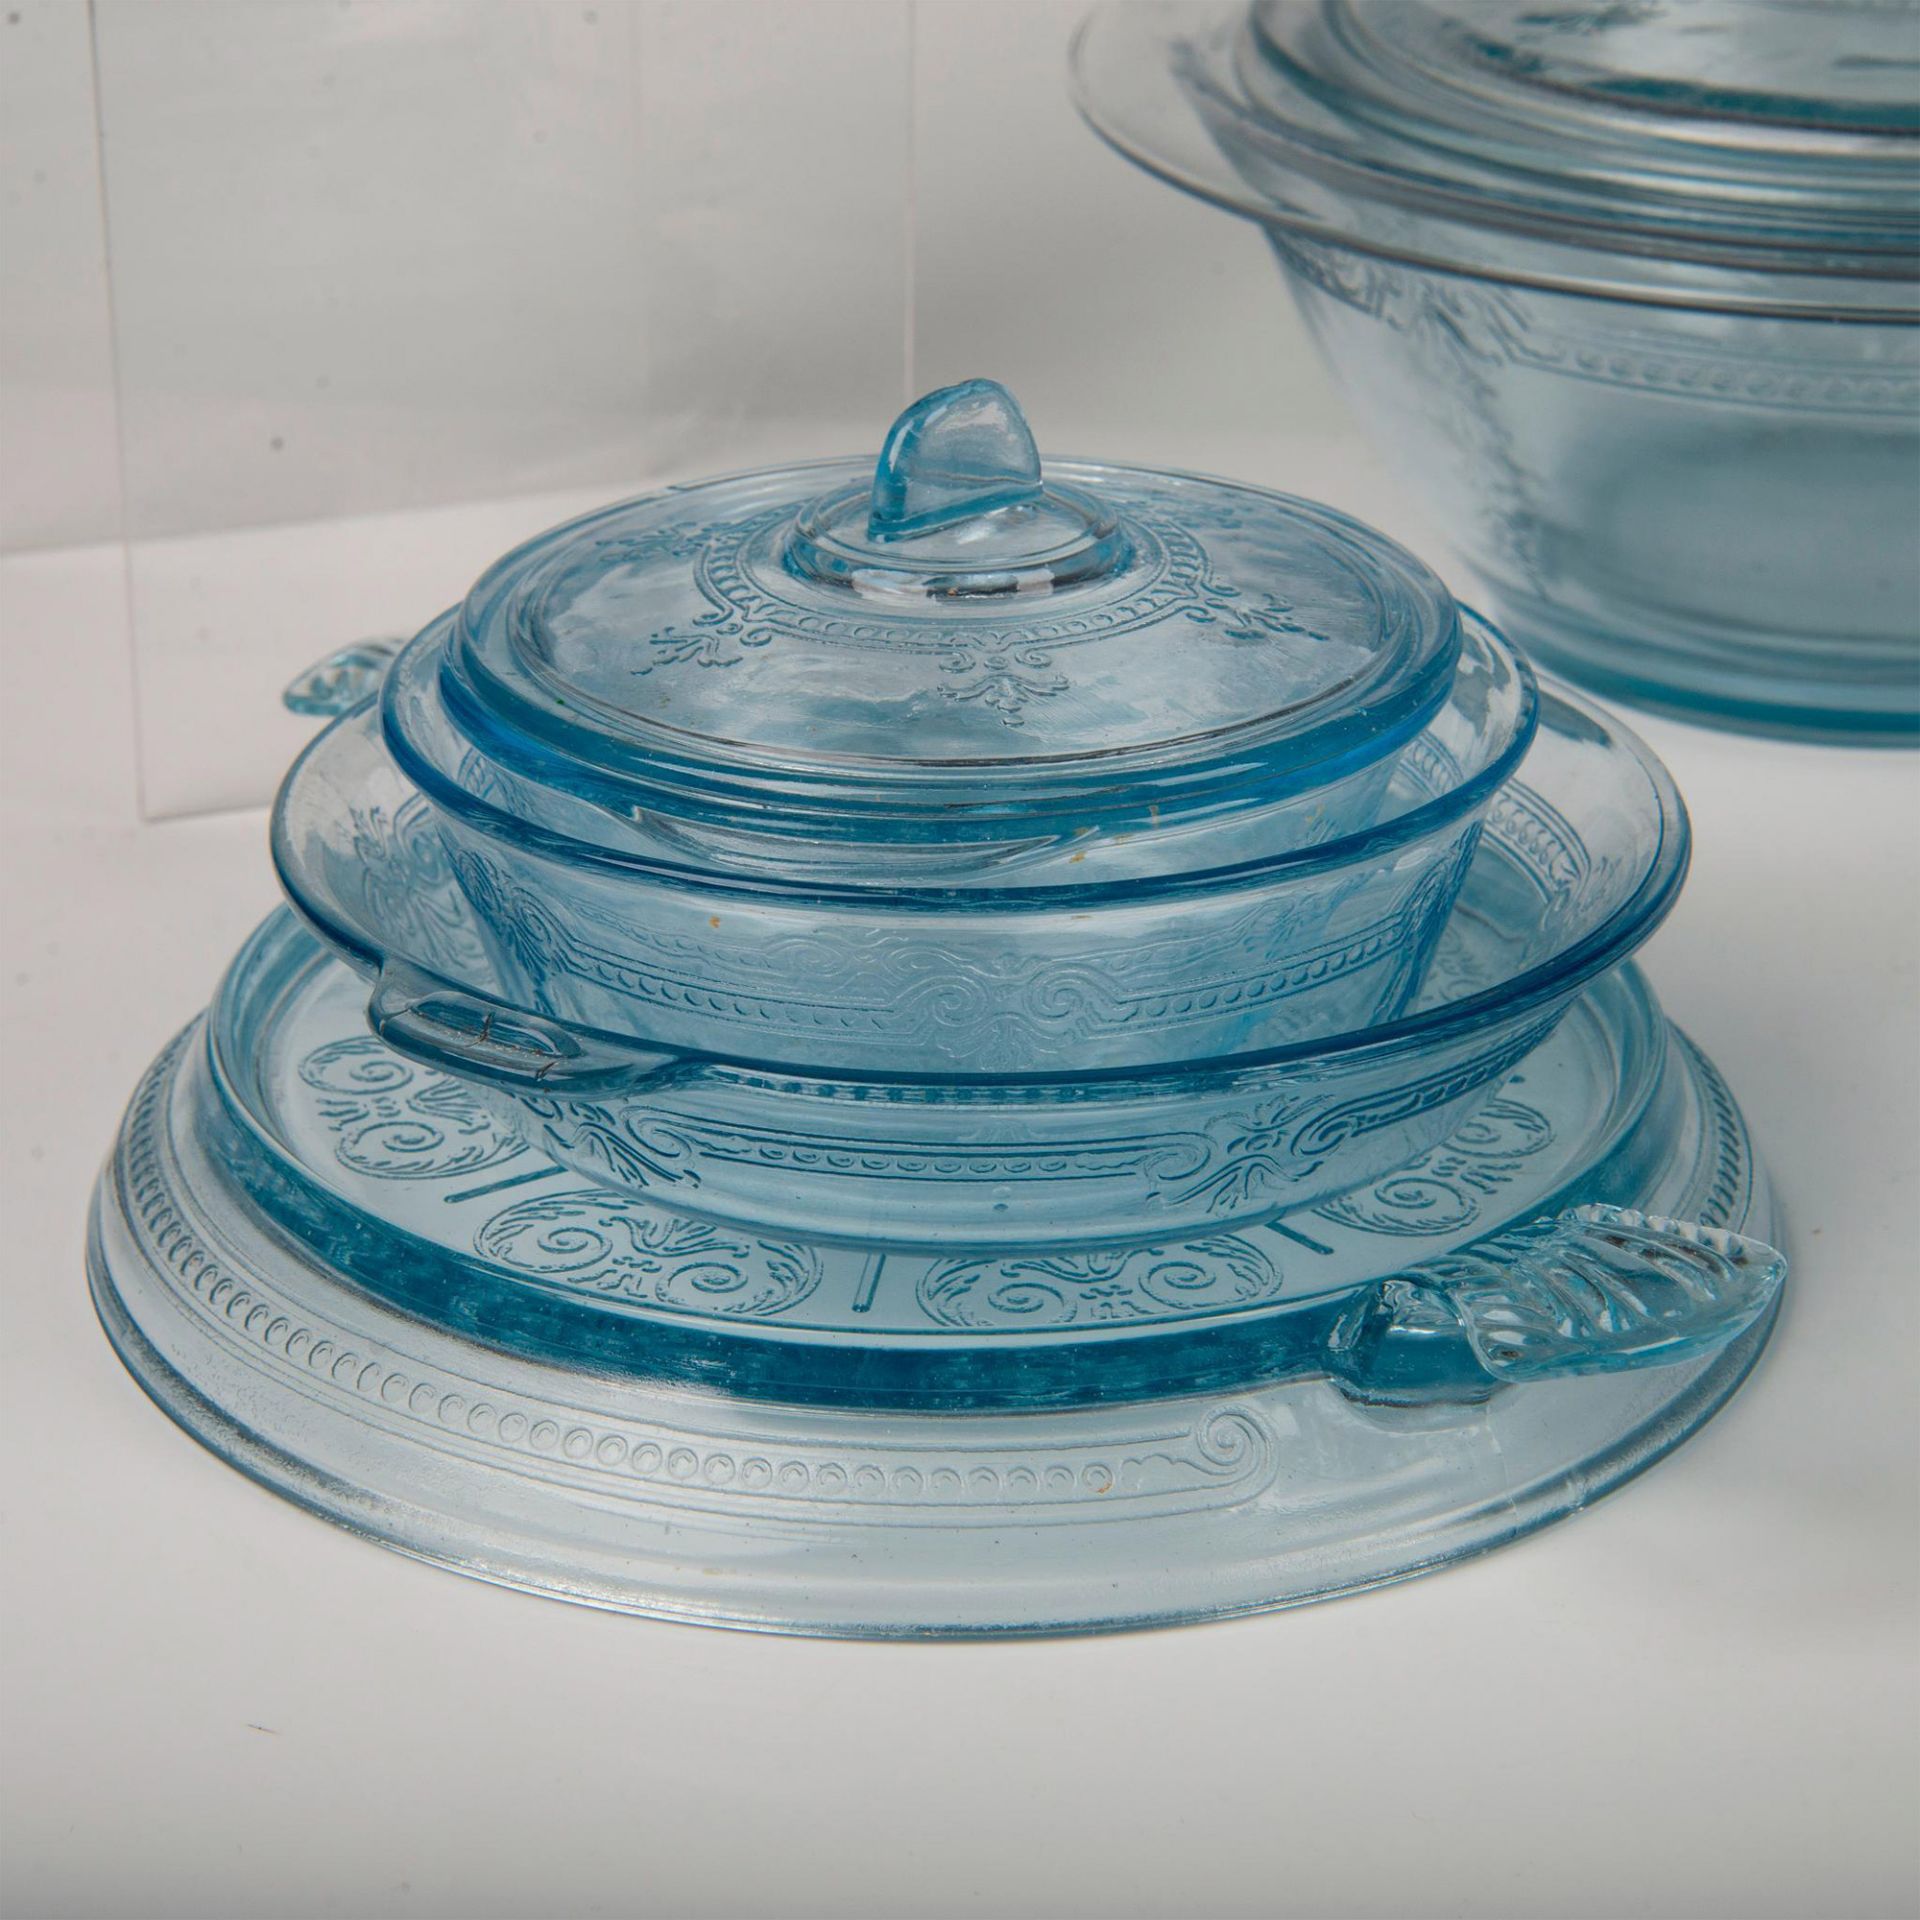 16pc Anchor Hocking Glass Kitchenware, Philbe Sapphire - Image 4 of 8